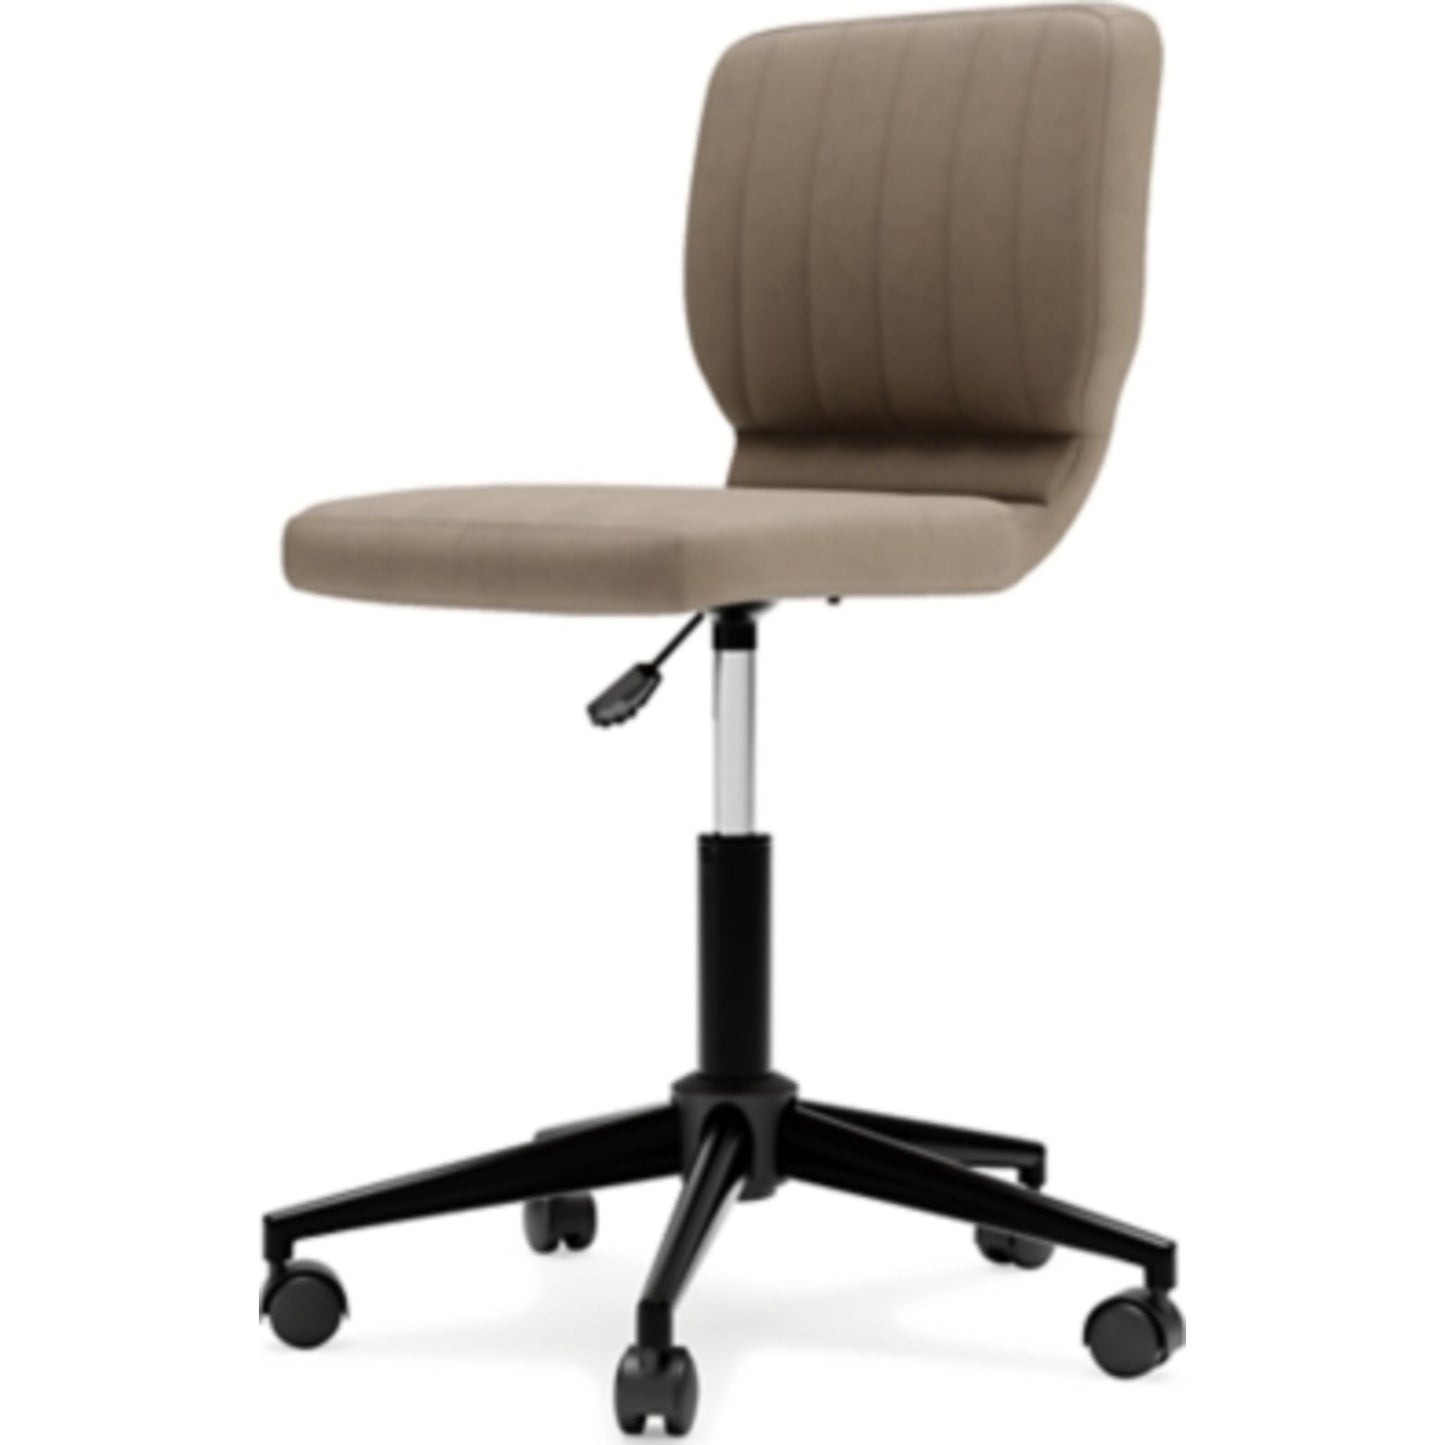 Beauenali Office Chair - Taupe